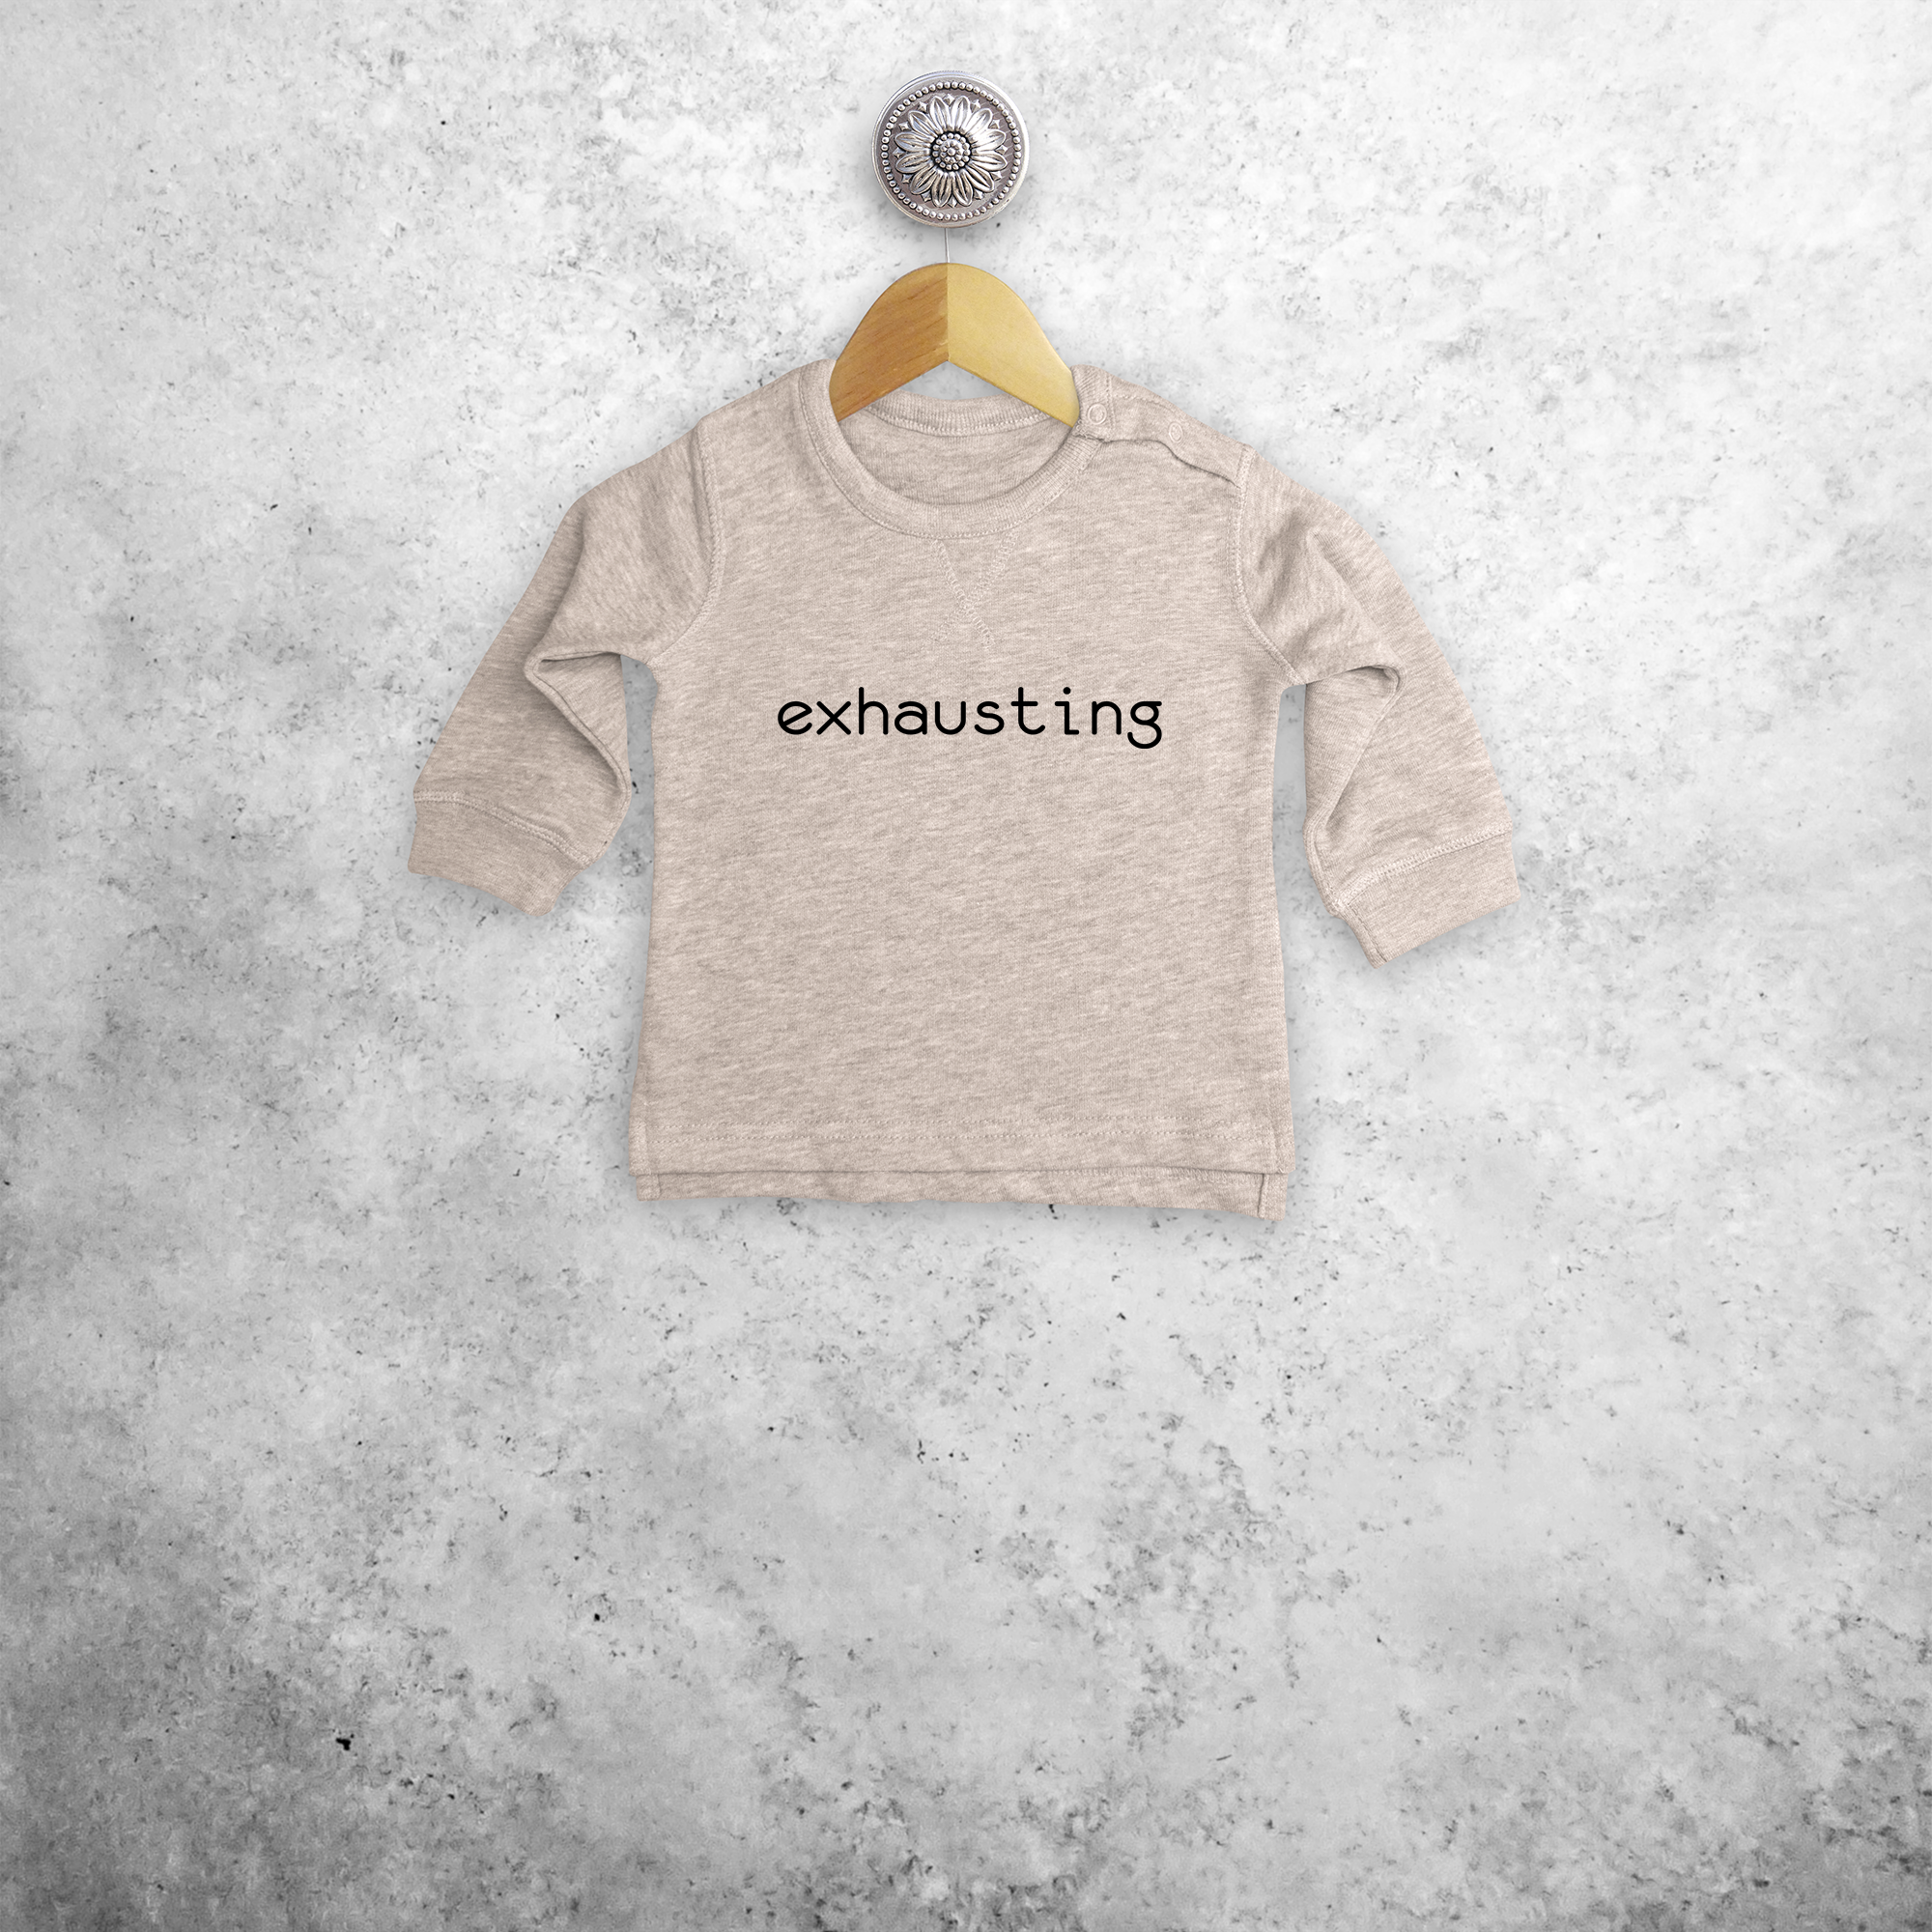 'Exhausting' baby sweater